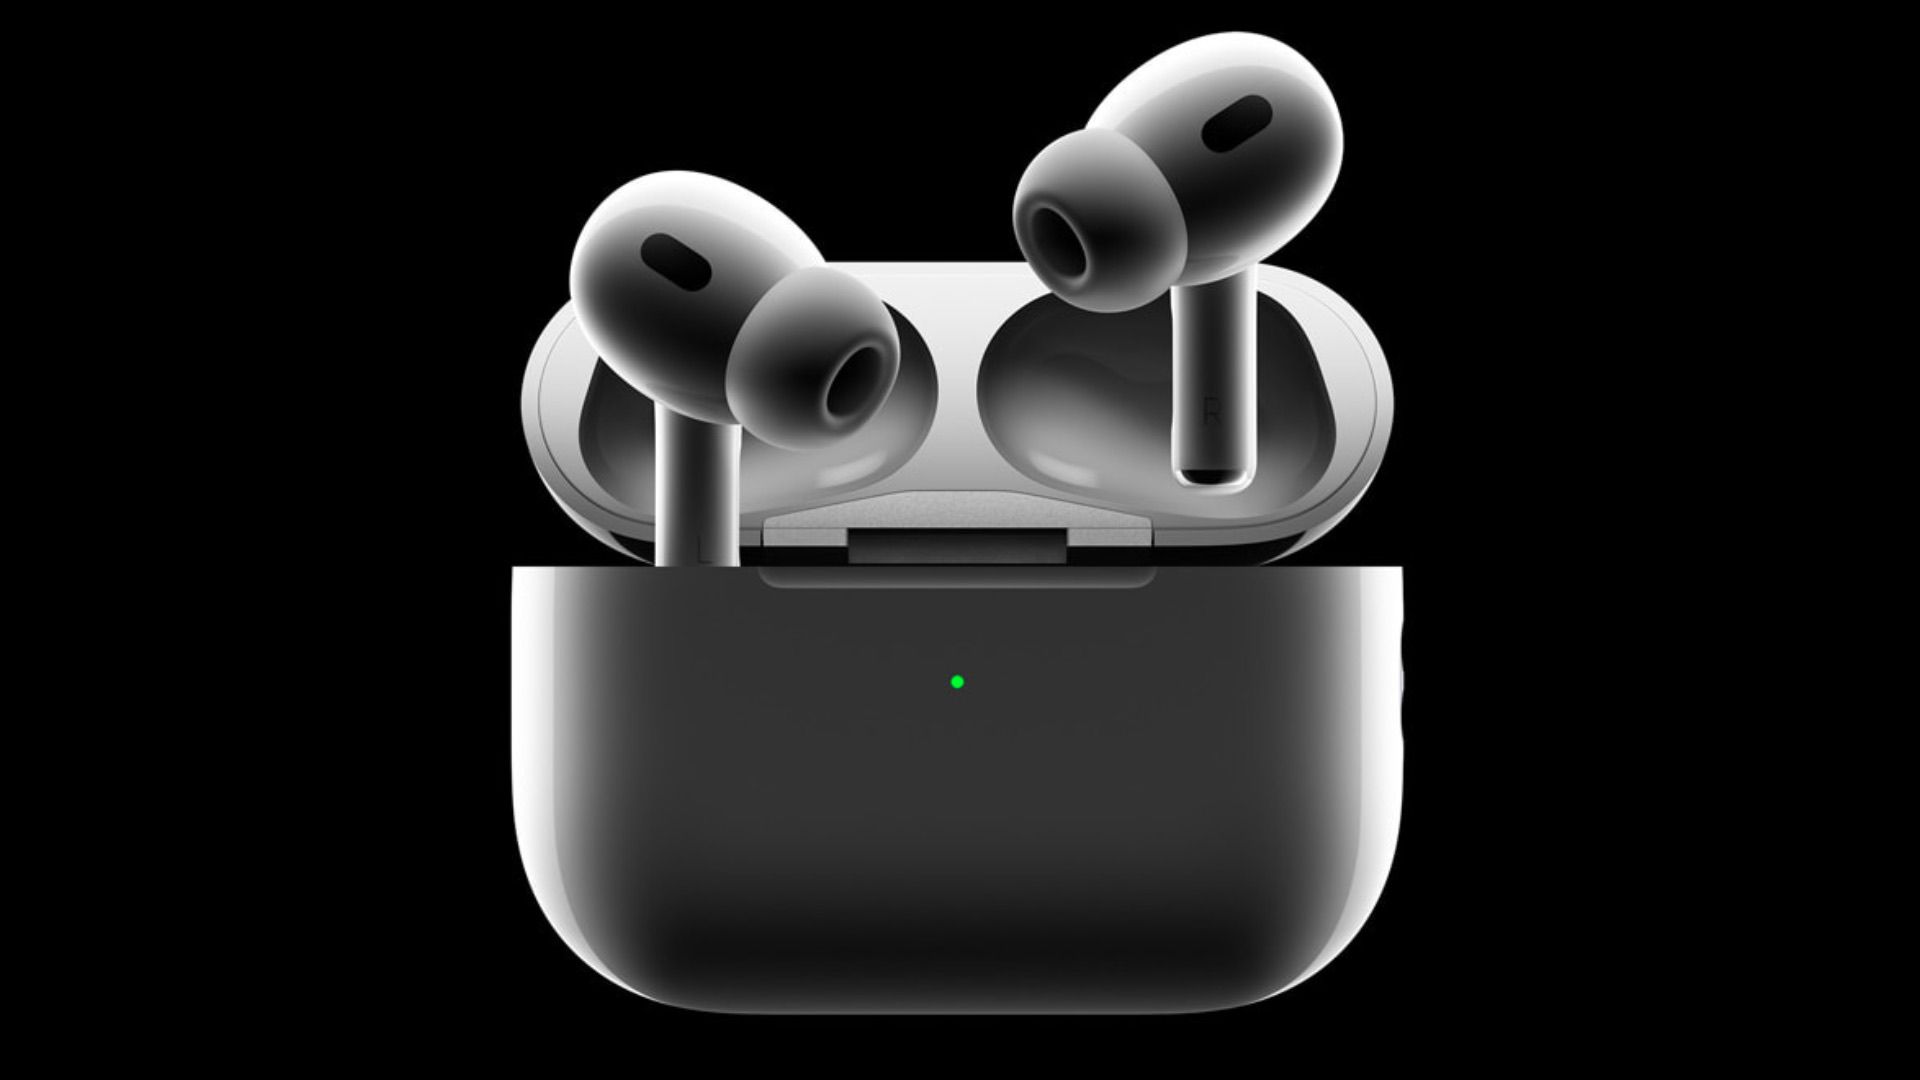 pilot Sober svale AirPods Pro vs. AirPods Pro 2 Buyer's Guide: Should You Upgrade? - MacRumors